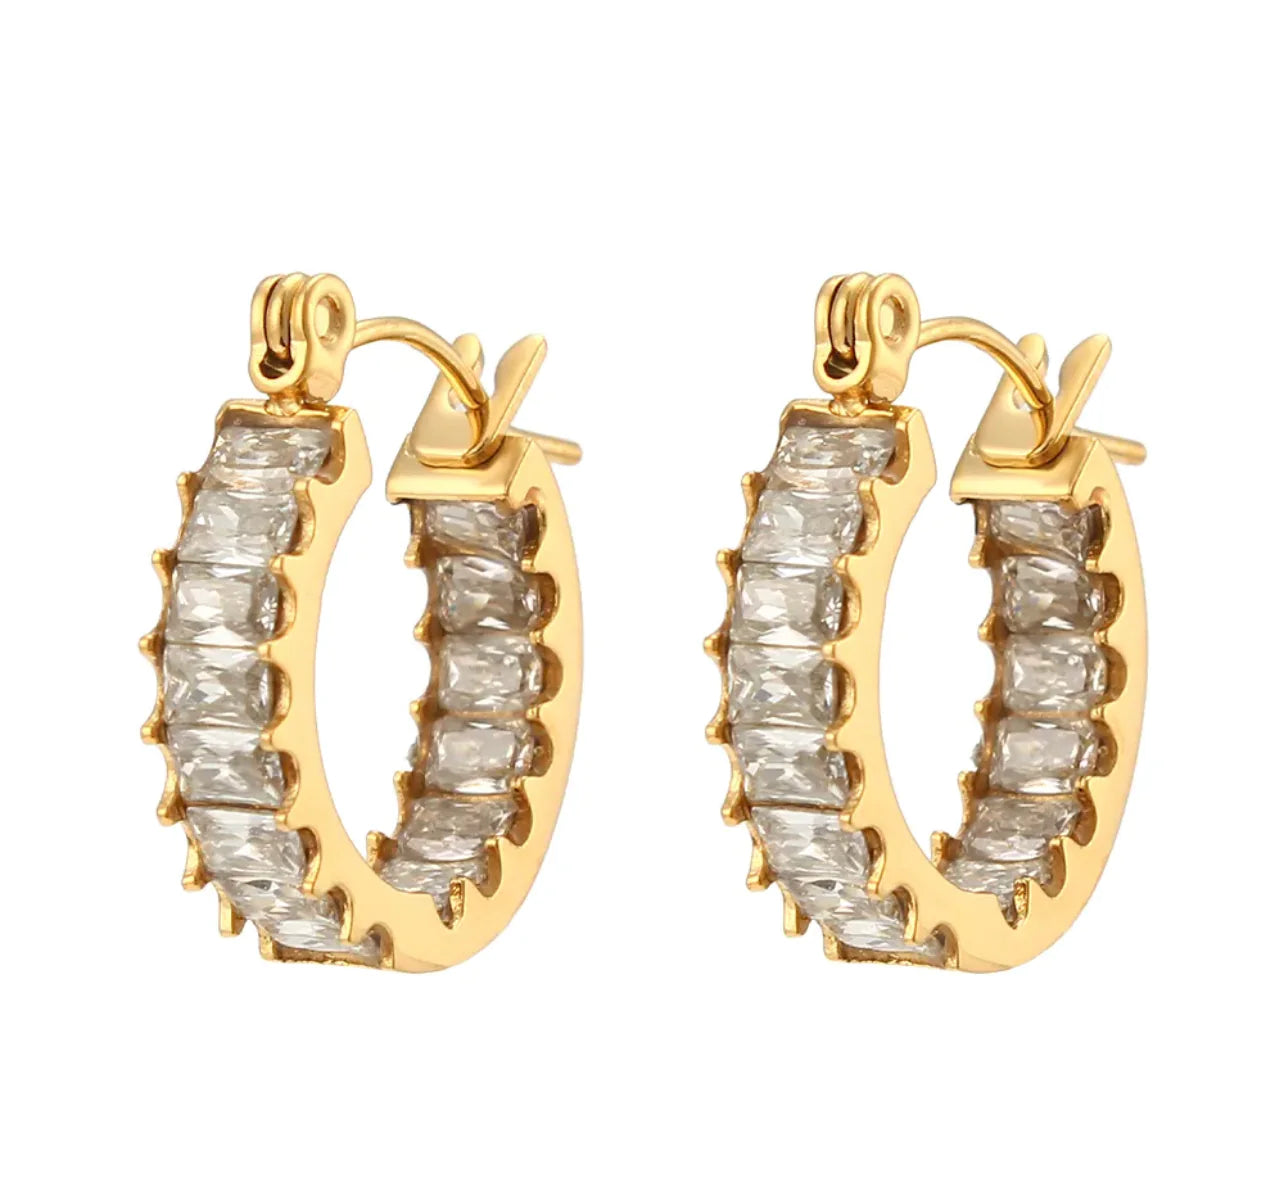 a pair of Becca Baguette Earrings with cubic zirconia stones by Lacy Rae Jewelry.